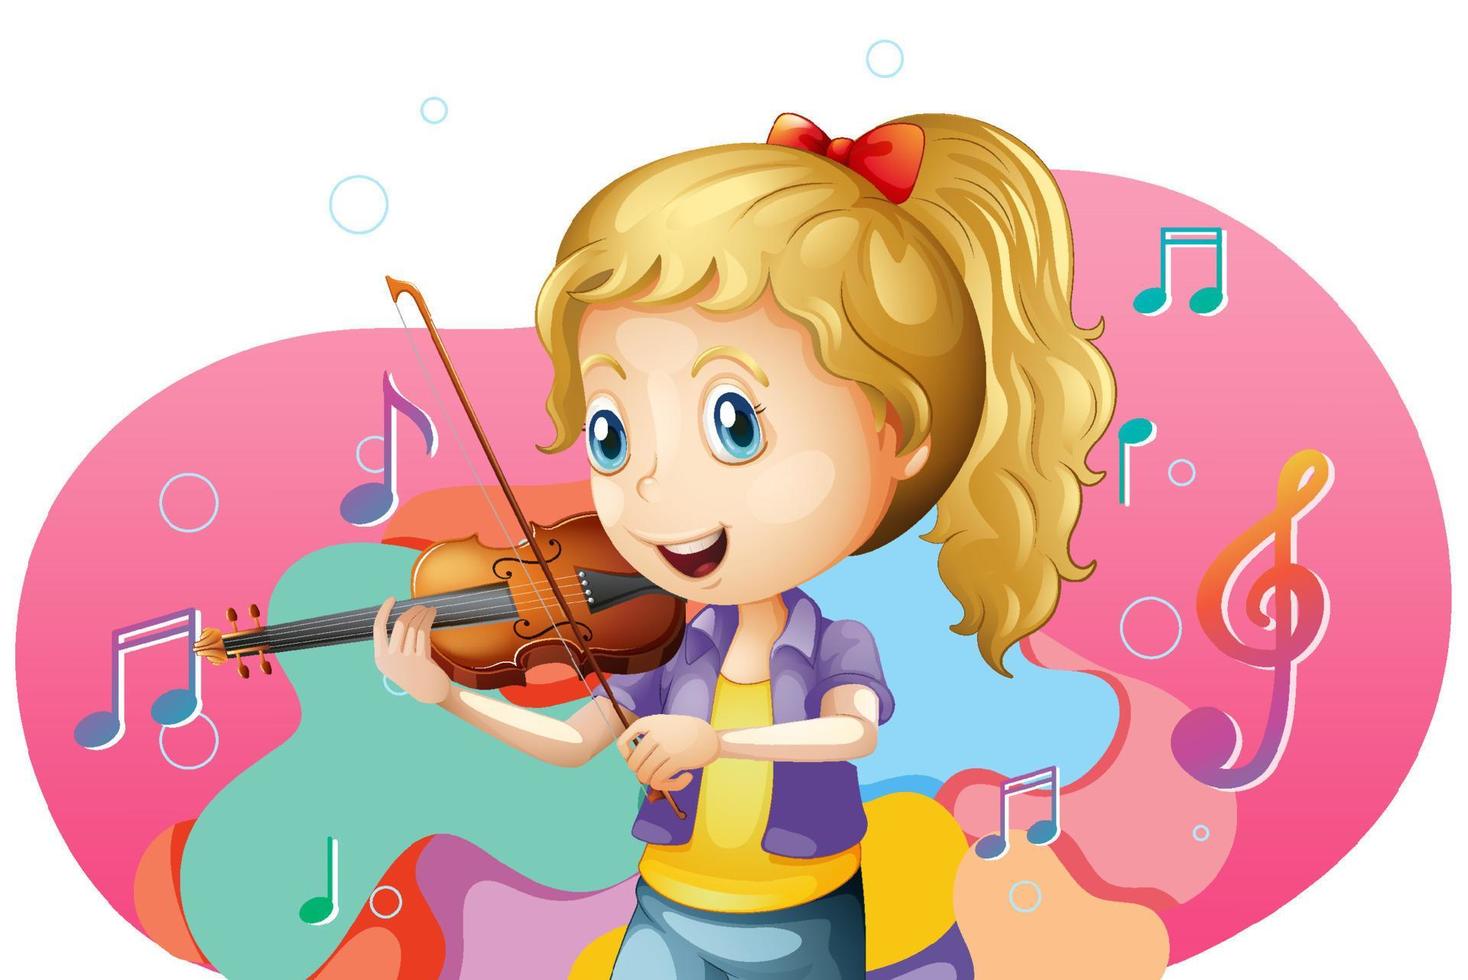 Cute cartoon character with music instrument vector